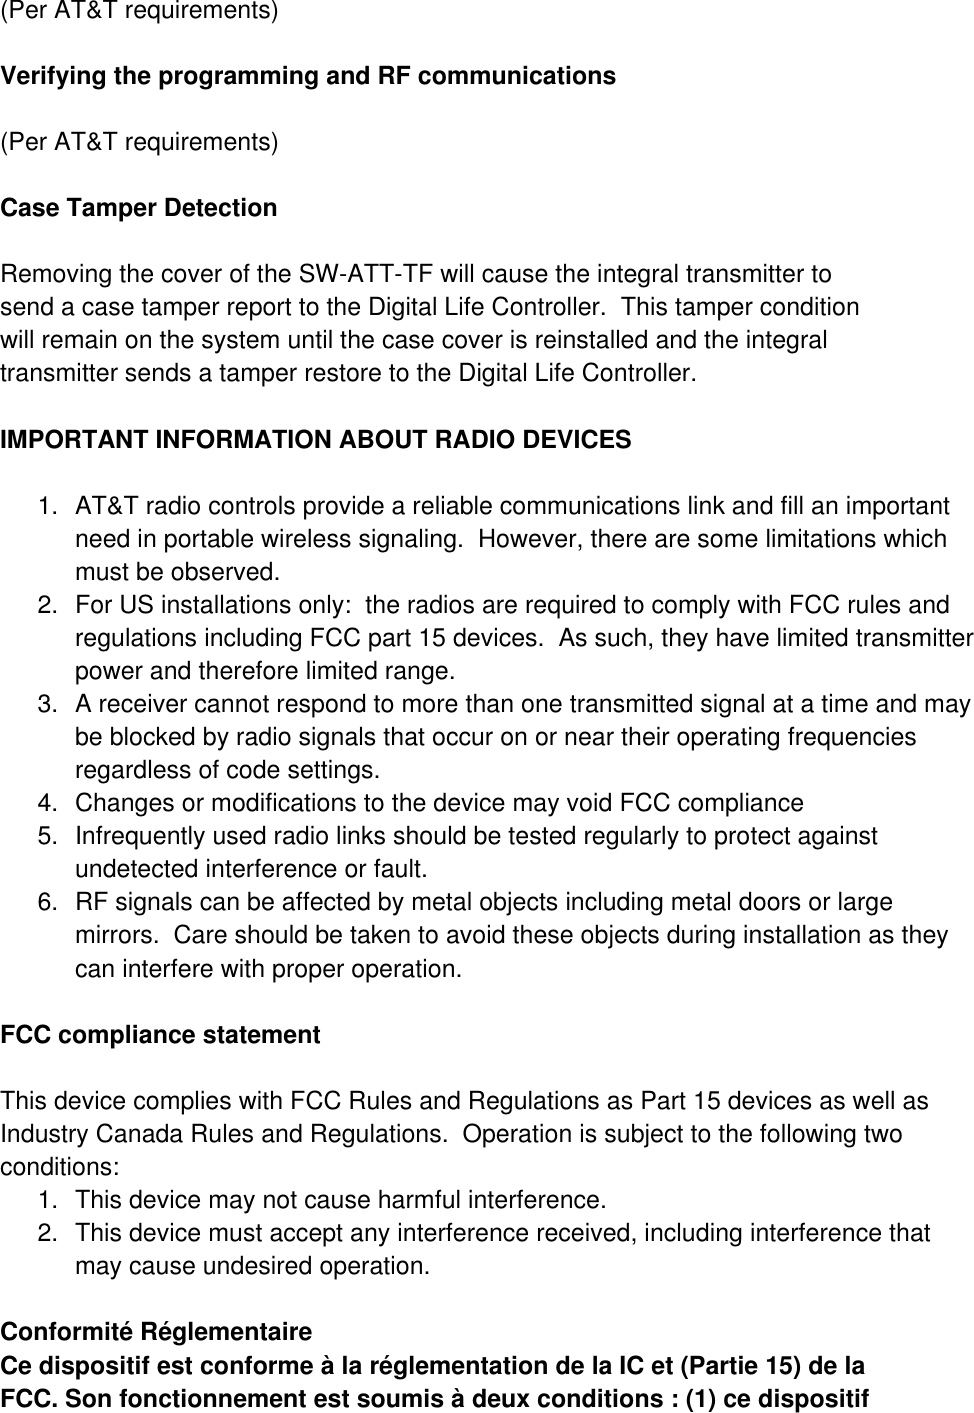 (Per AT&amp;T requirements)  Verifying the programming and RF communications  (Per AT&amp;T requirements)  Case Tamper Detection  Removing the cover of the SW-ATT-TF will cause the integral transmitter to send a case tamper report to the Digital Life Controller.  This tamper condition will remain on the system until the case cover is reinstalled and the integral transmitter sends a tamper restore to the Digital Life Controller.  IMPORTANT INFORMATION ABOUT RADIO DEVICES  1.  AT&amp;T radio controls provide a reliable communications link and fill an important need in portable wireless signaling.  However, there are some limitations which must be observed. 2.  For US installations only:  the radios are required to comply with FCC rules and regulations including FCC part 15 devices.  As such, they have limited transmitter power and therefore limited range. 3.  A receiver cannot respond to more than one transmitted signal at a time and may be blocked by radio signals that occur on or near their operating frequencies regardless of code settings. 4.  Changes or modifications to the device may void FCC compliance 5.  Infrequently used radio links should be tested regularly to protect against undetected interference or fault. 6.  RF signals can be affected by metal objects including metal doors or large mirrors.  Care should be taken to avoid these objects during installation as they can interfere with proper operation.  FCC compliance statement  This device complies with FCC Rules and Regulations as Part 15 devices as well as Industry Canada Rules and Regulations.  Operation is subject to the following two conditions: 1.  This device may not cause harmful interference. 2.  This device must accept any interference received, including interference that may cause undesired operation.  Conformité Réglementaire Ce dispositif est conforme à la réglementation de la IC et (Partie 15) de la FCC. Son fonctionnement est soumis à deux conditions : (1) ce dispositif 